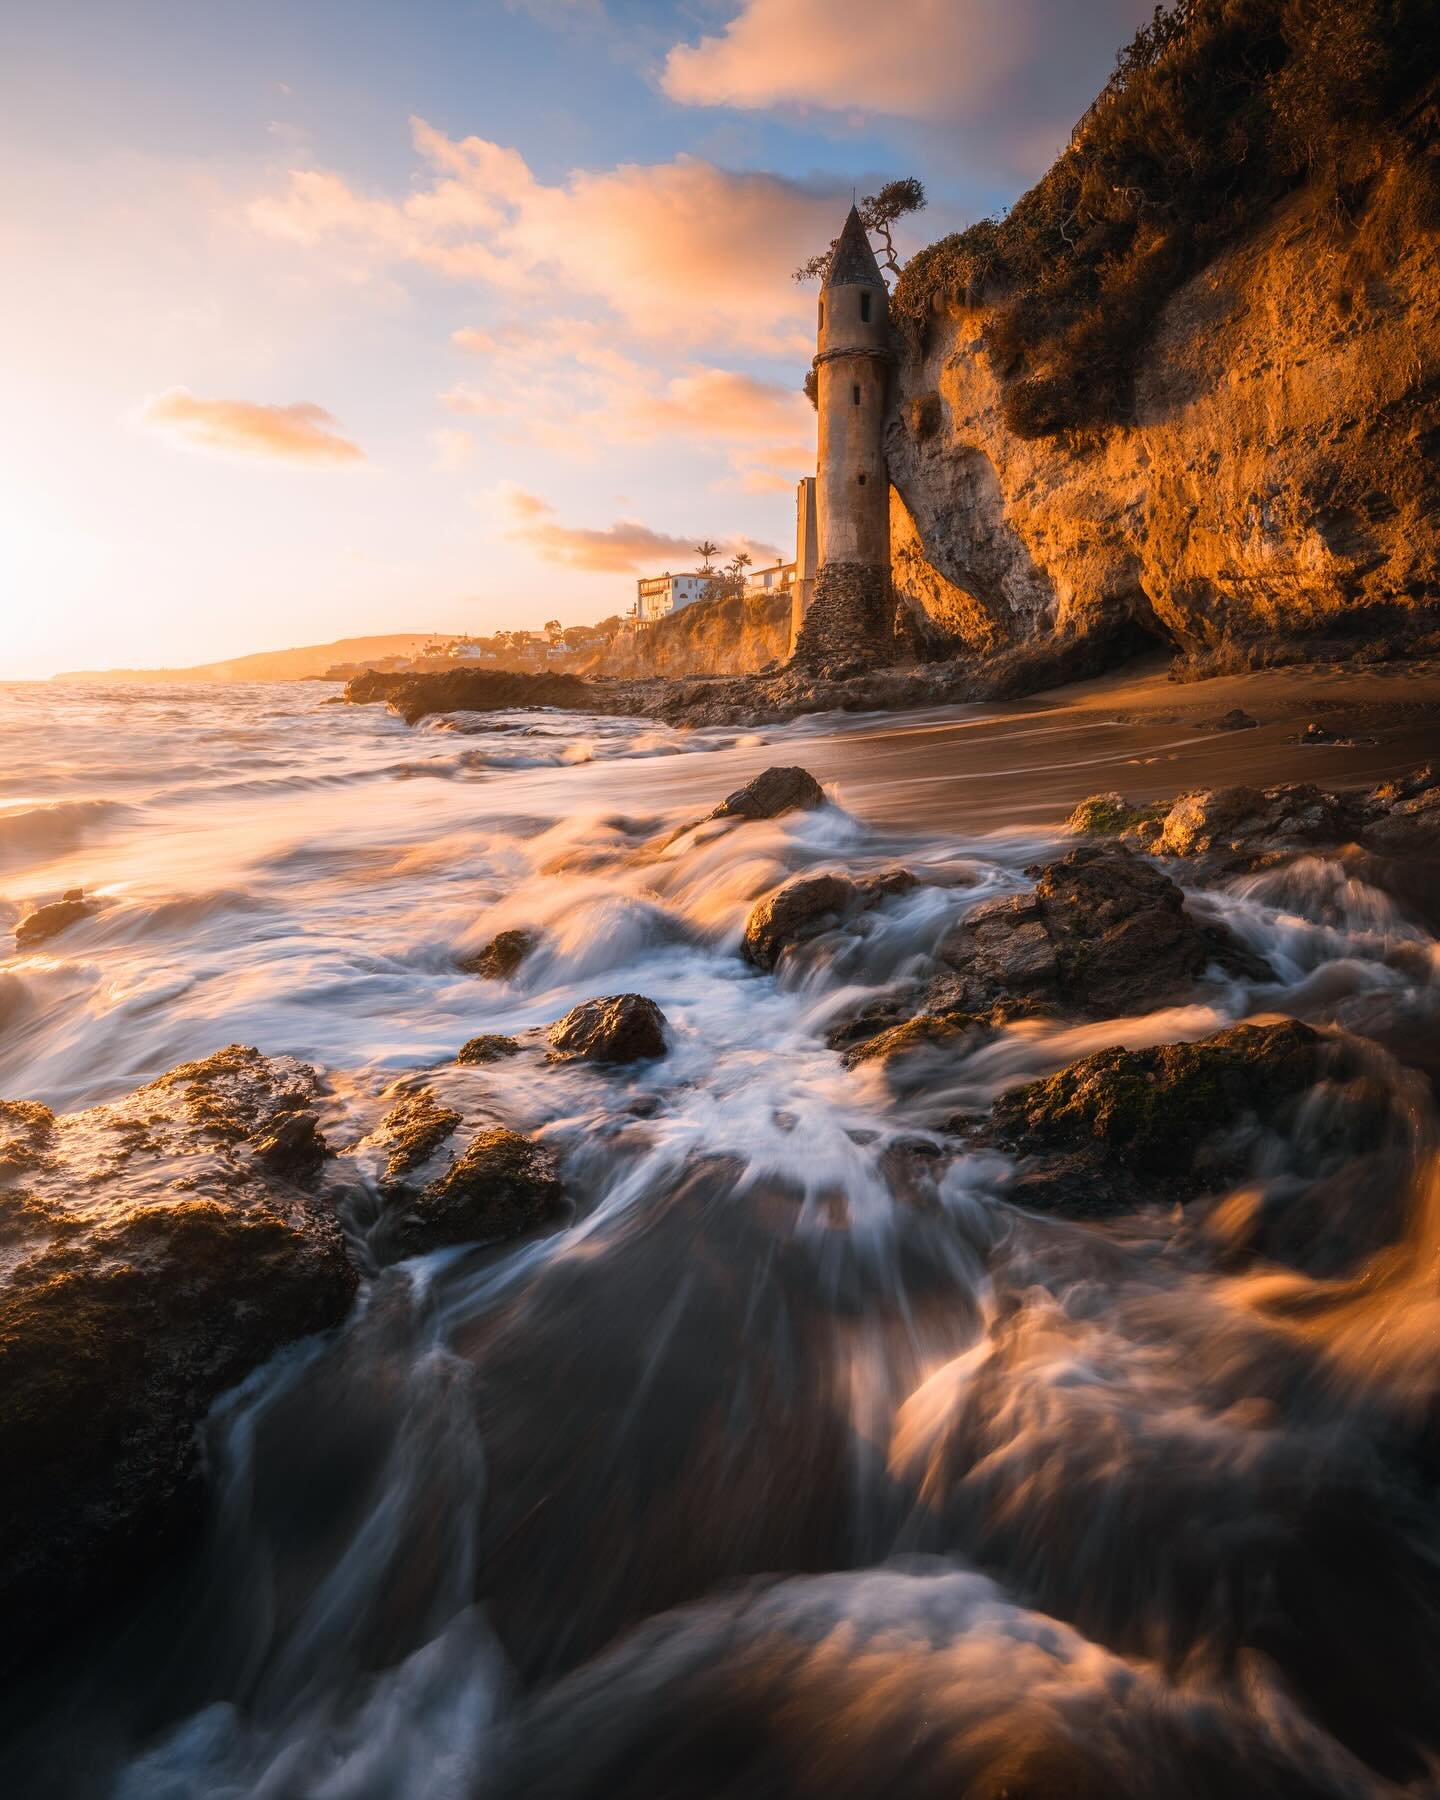 Golden hour at Laguna 🌊☀️

Seascapes have quickly become one of my favorite types of photography, and when I&rsquo;ve got free time I find myself at the beach more and more often. I love how each wave is so unique and you never quite know what you&r